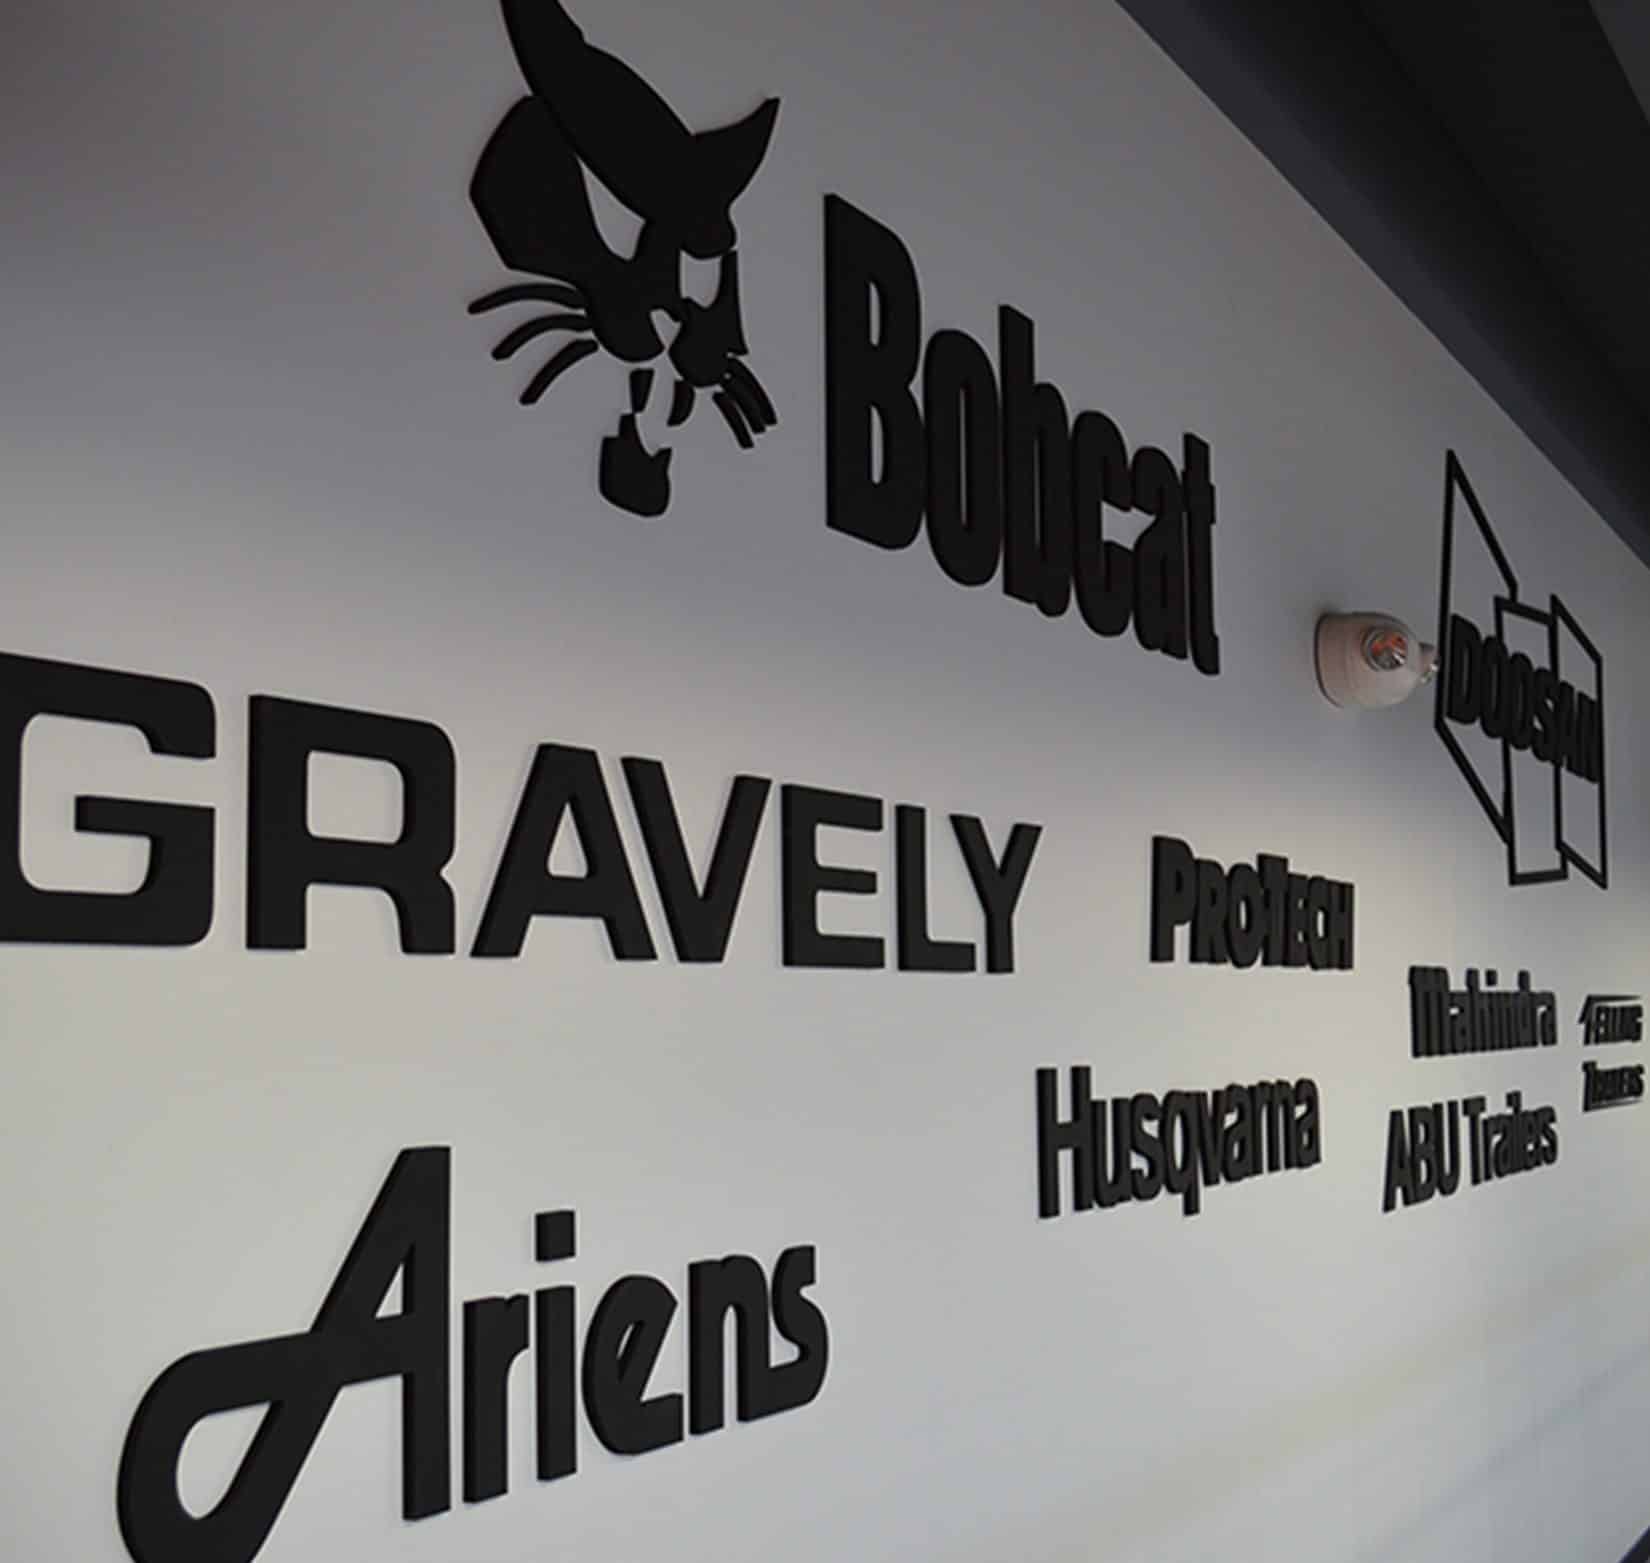 An assortment of company logos installed in black text on a white wall